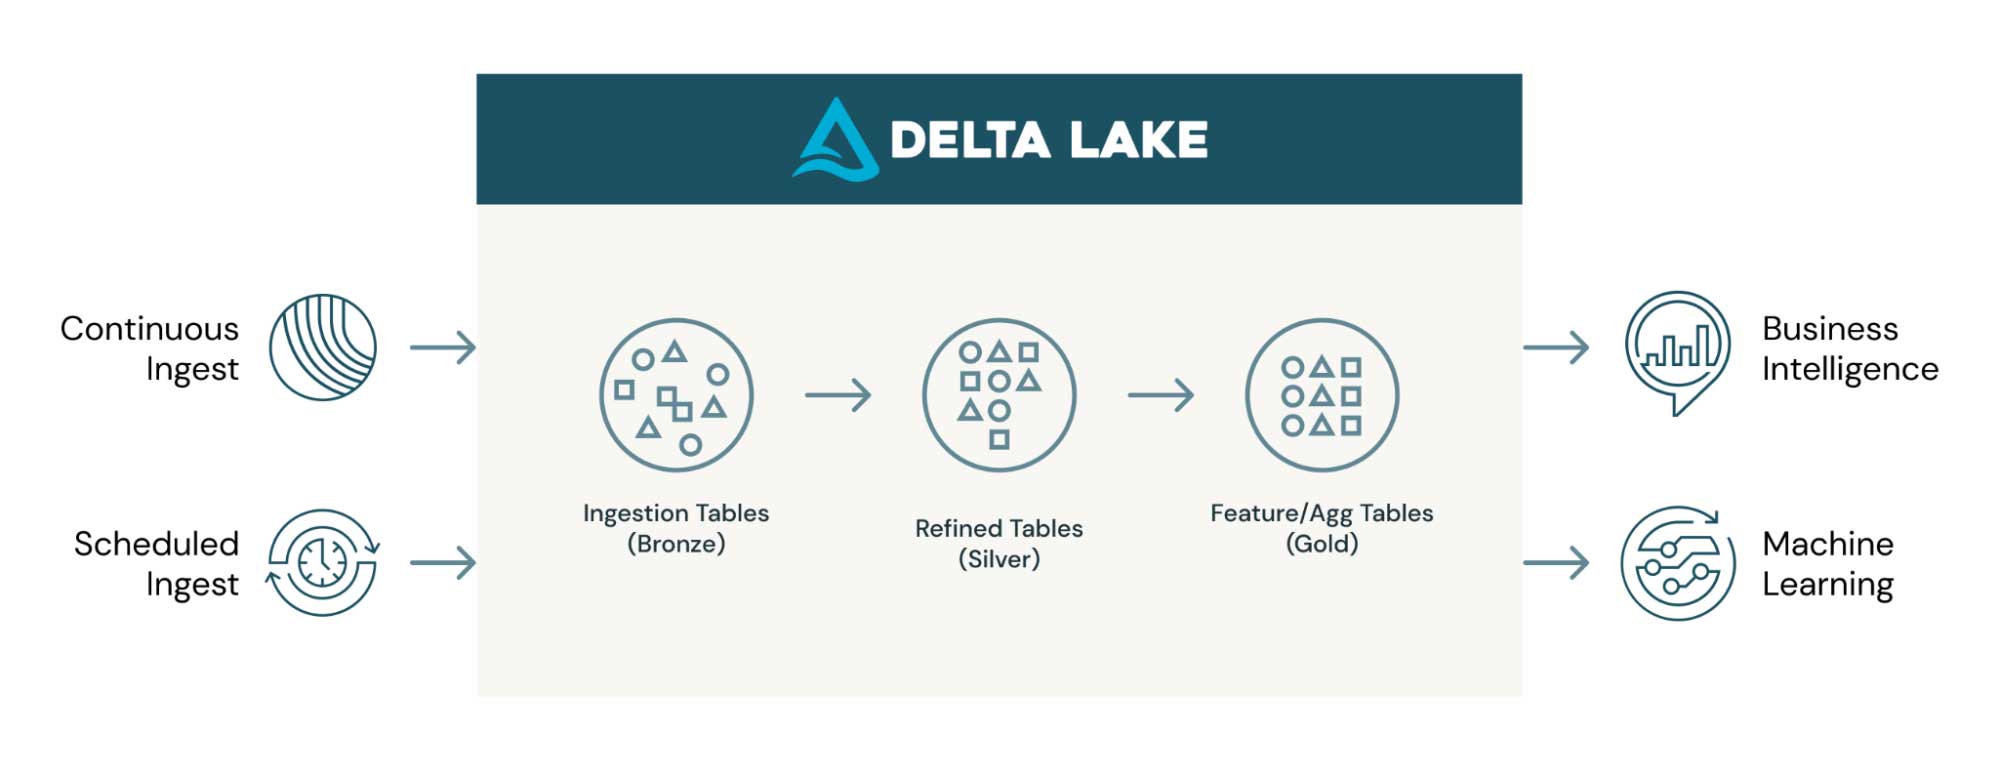 With Delta Lake you can incrementally ingest data continuously or with a scheduled job.